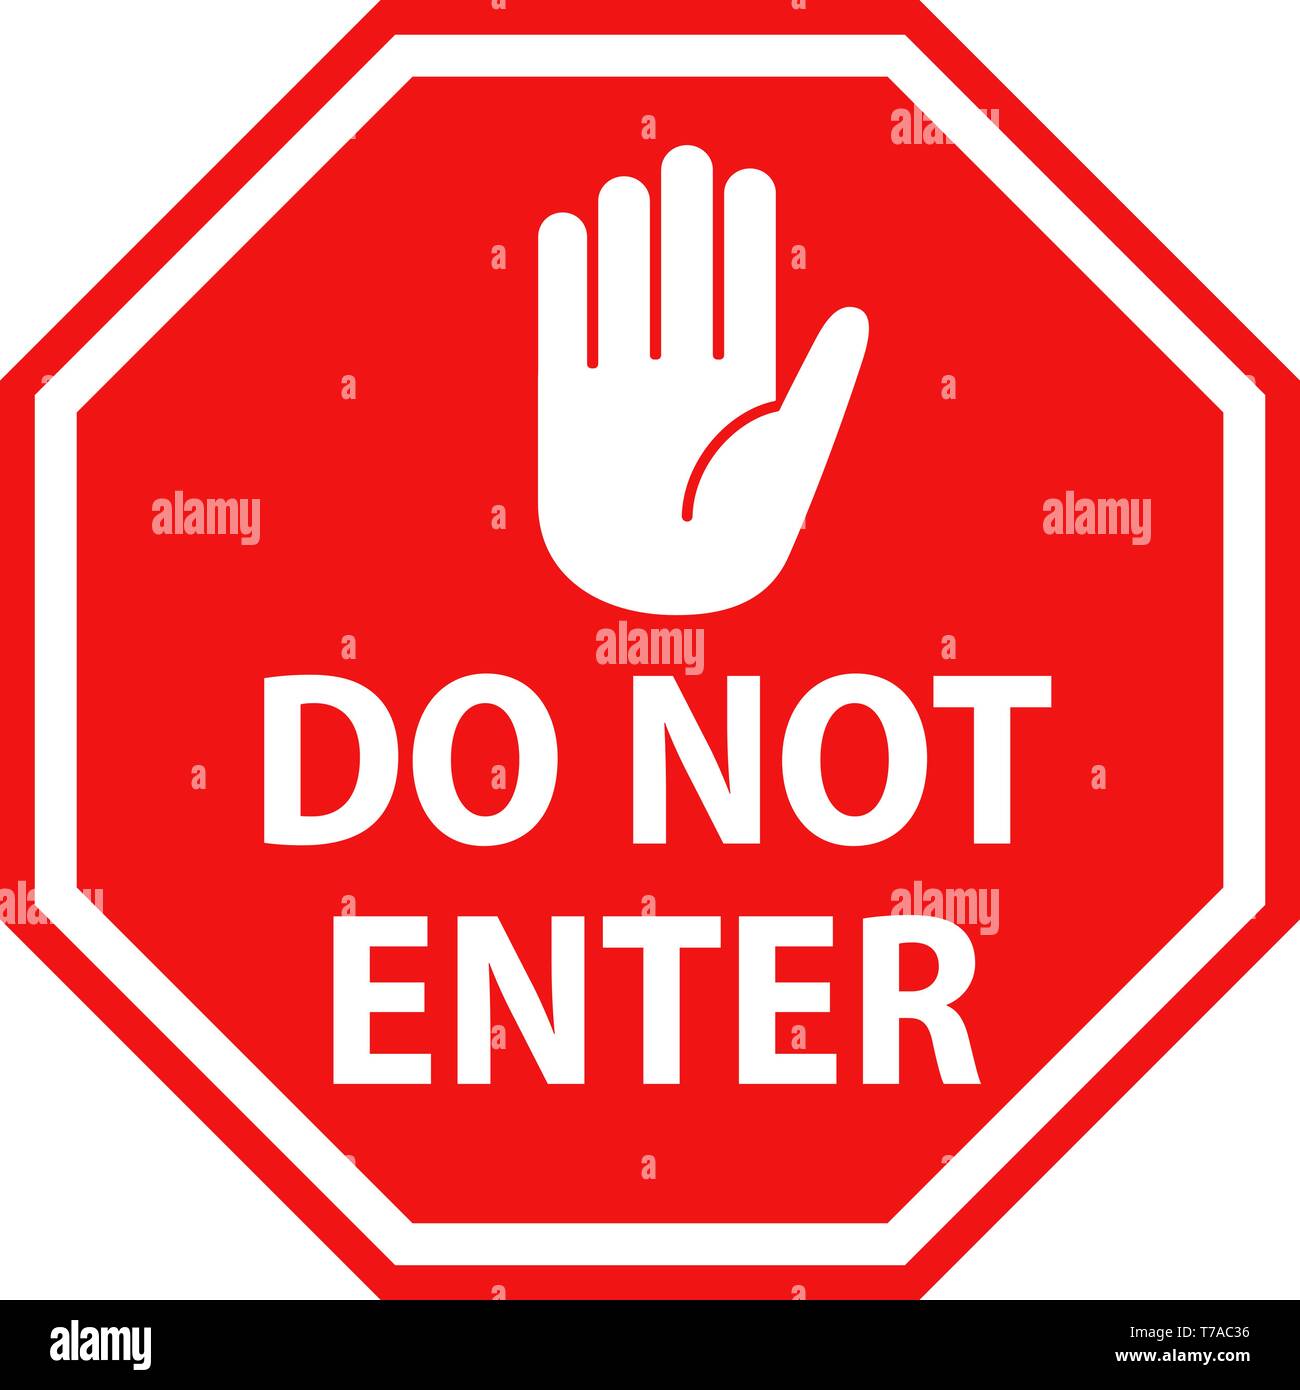 Do not enter roadsign with hand symbol or icon vector illustration Stock Vector